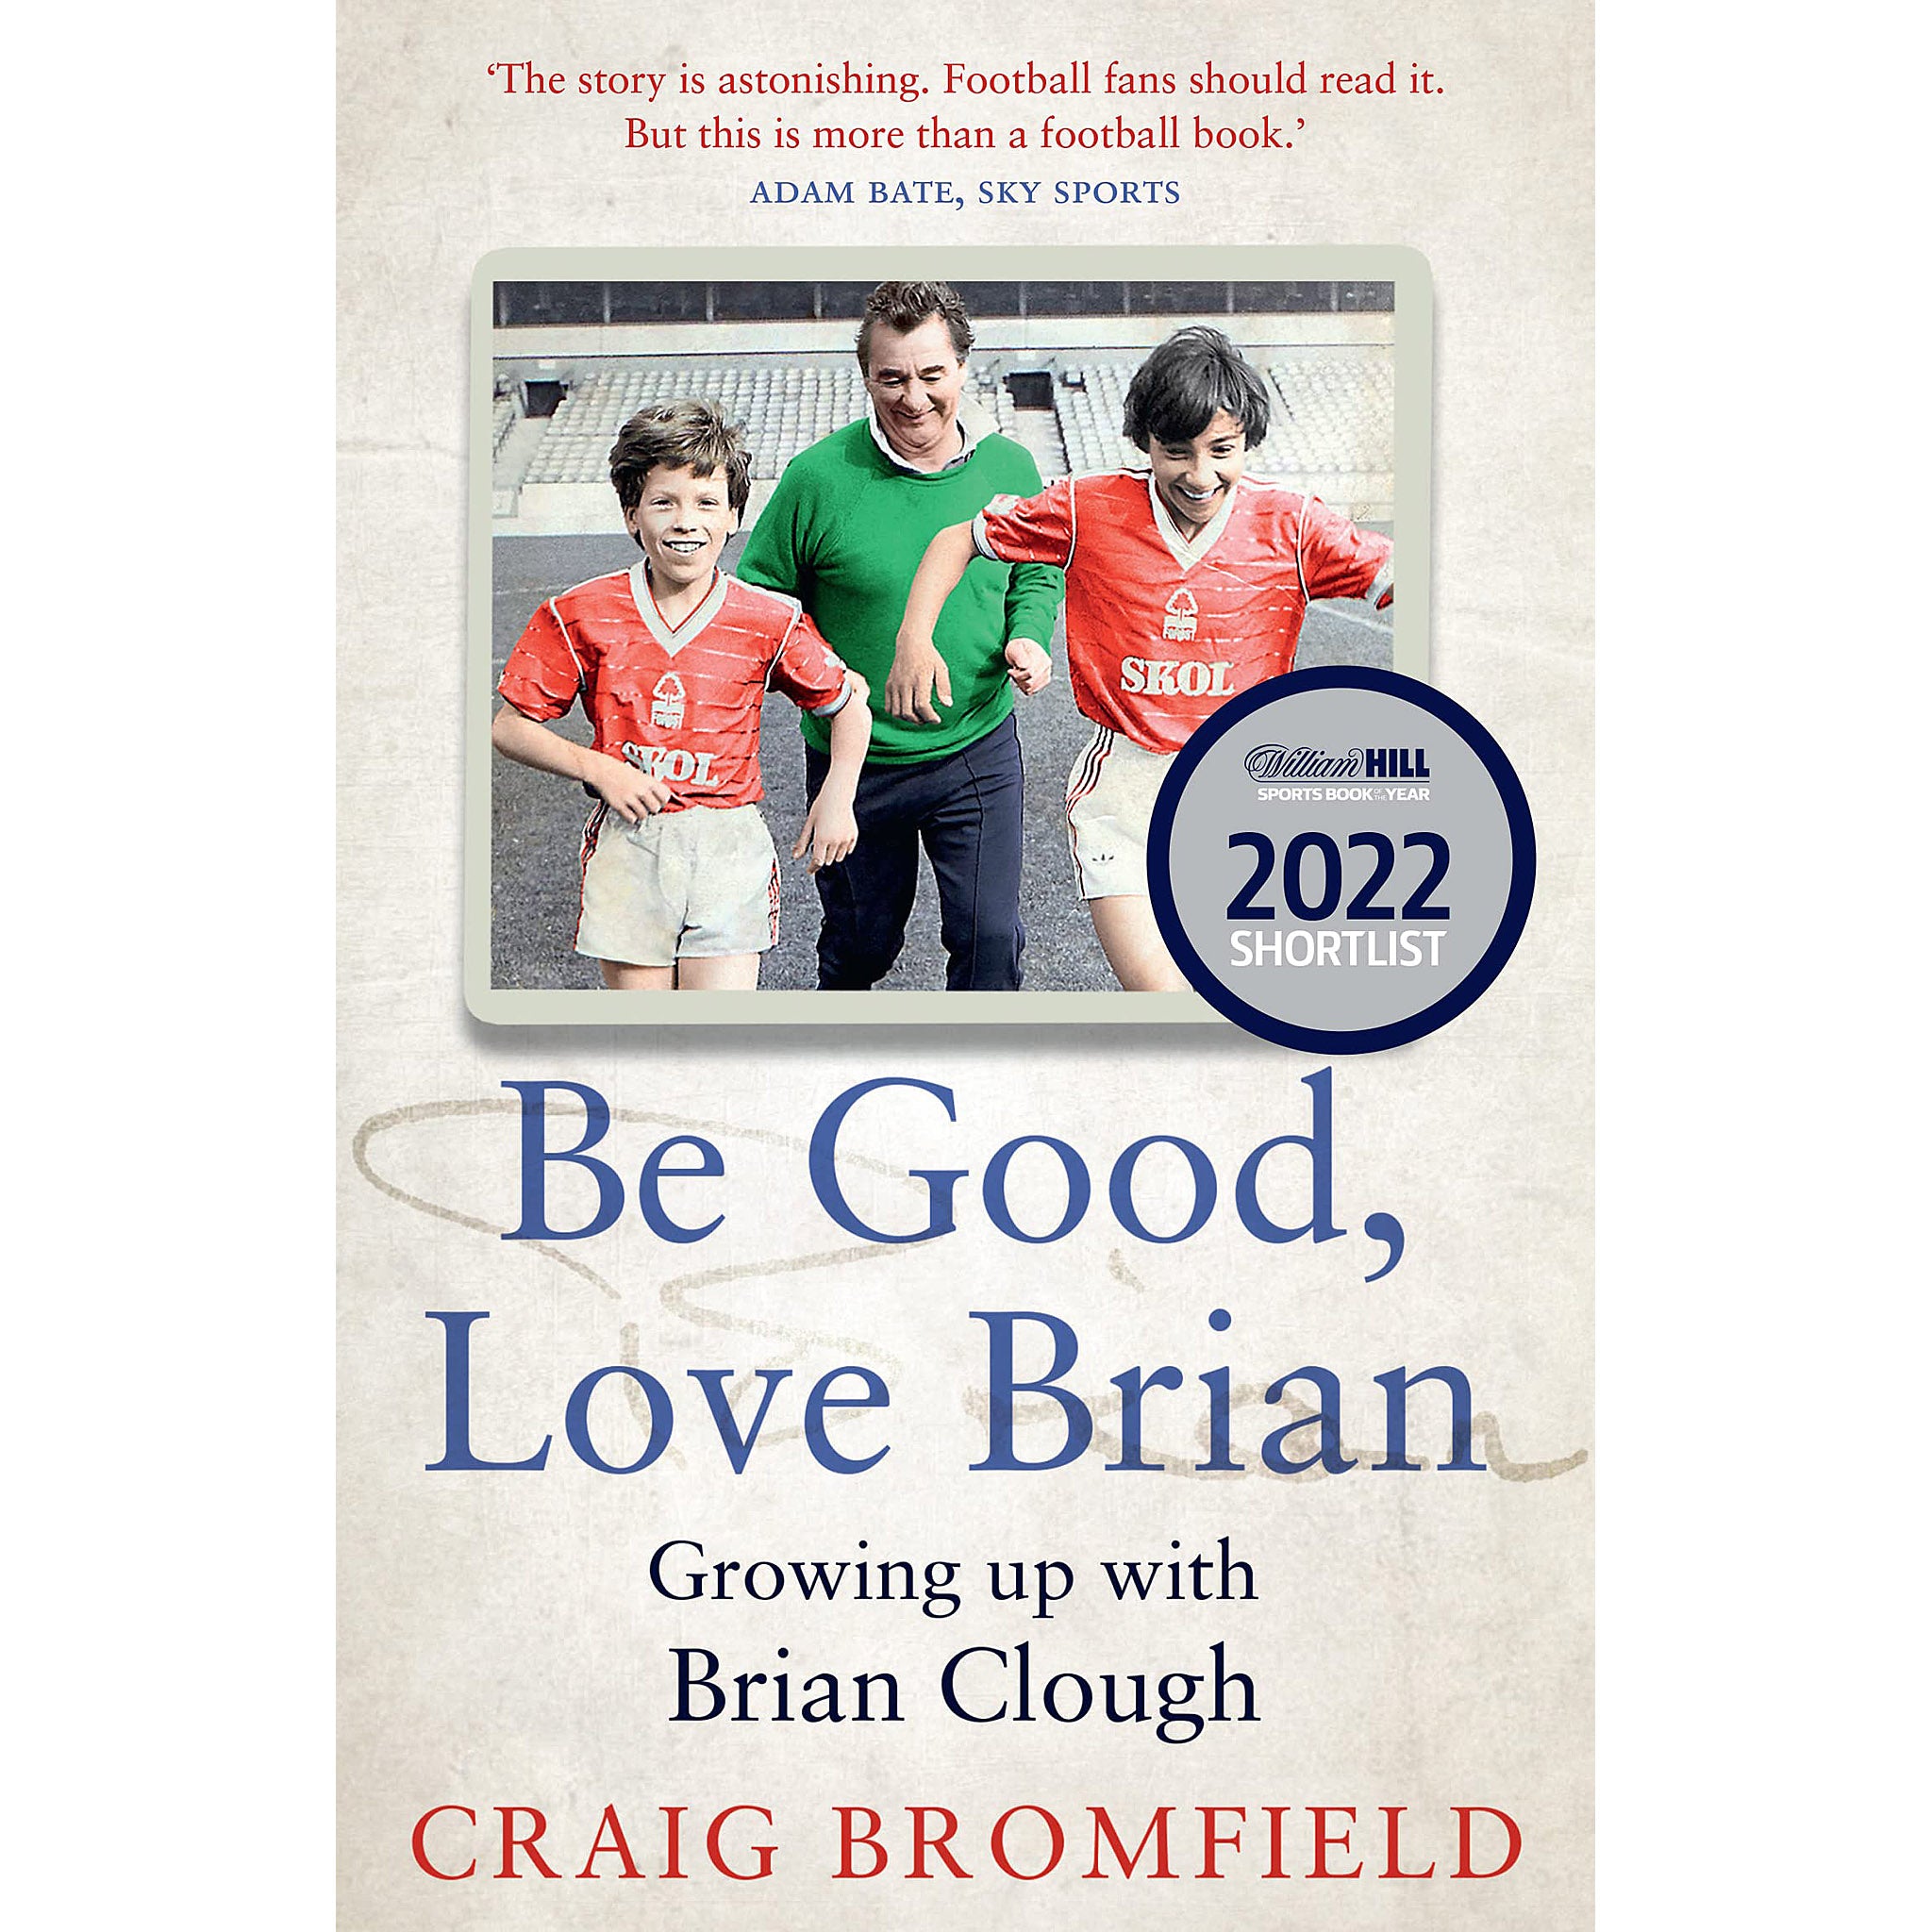 Be Good, Love Brian – Growing up with Brian Clough